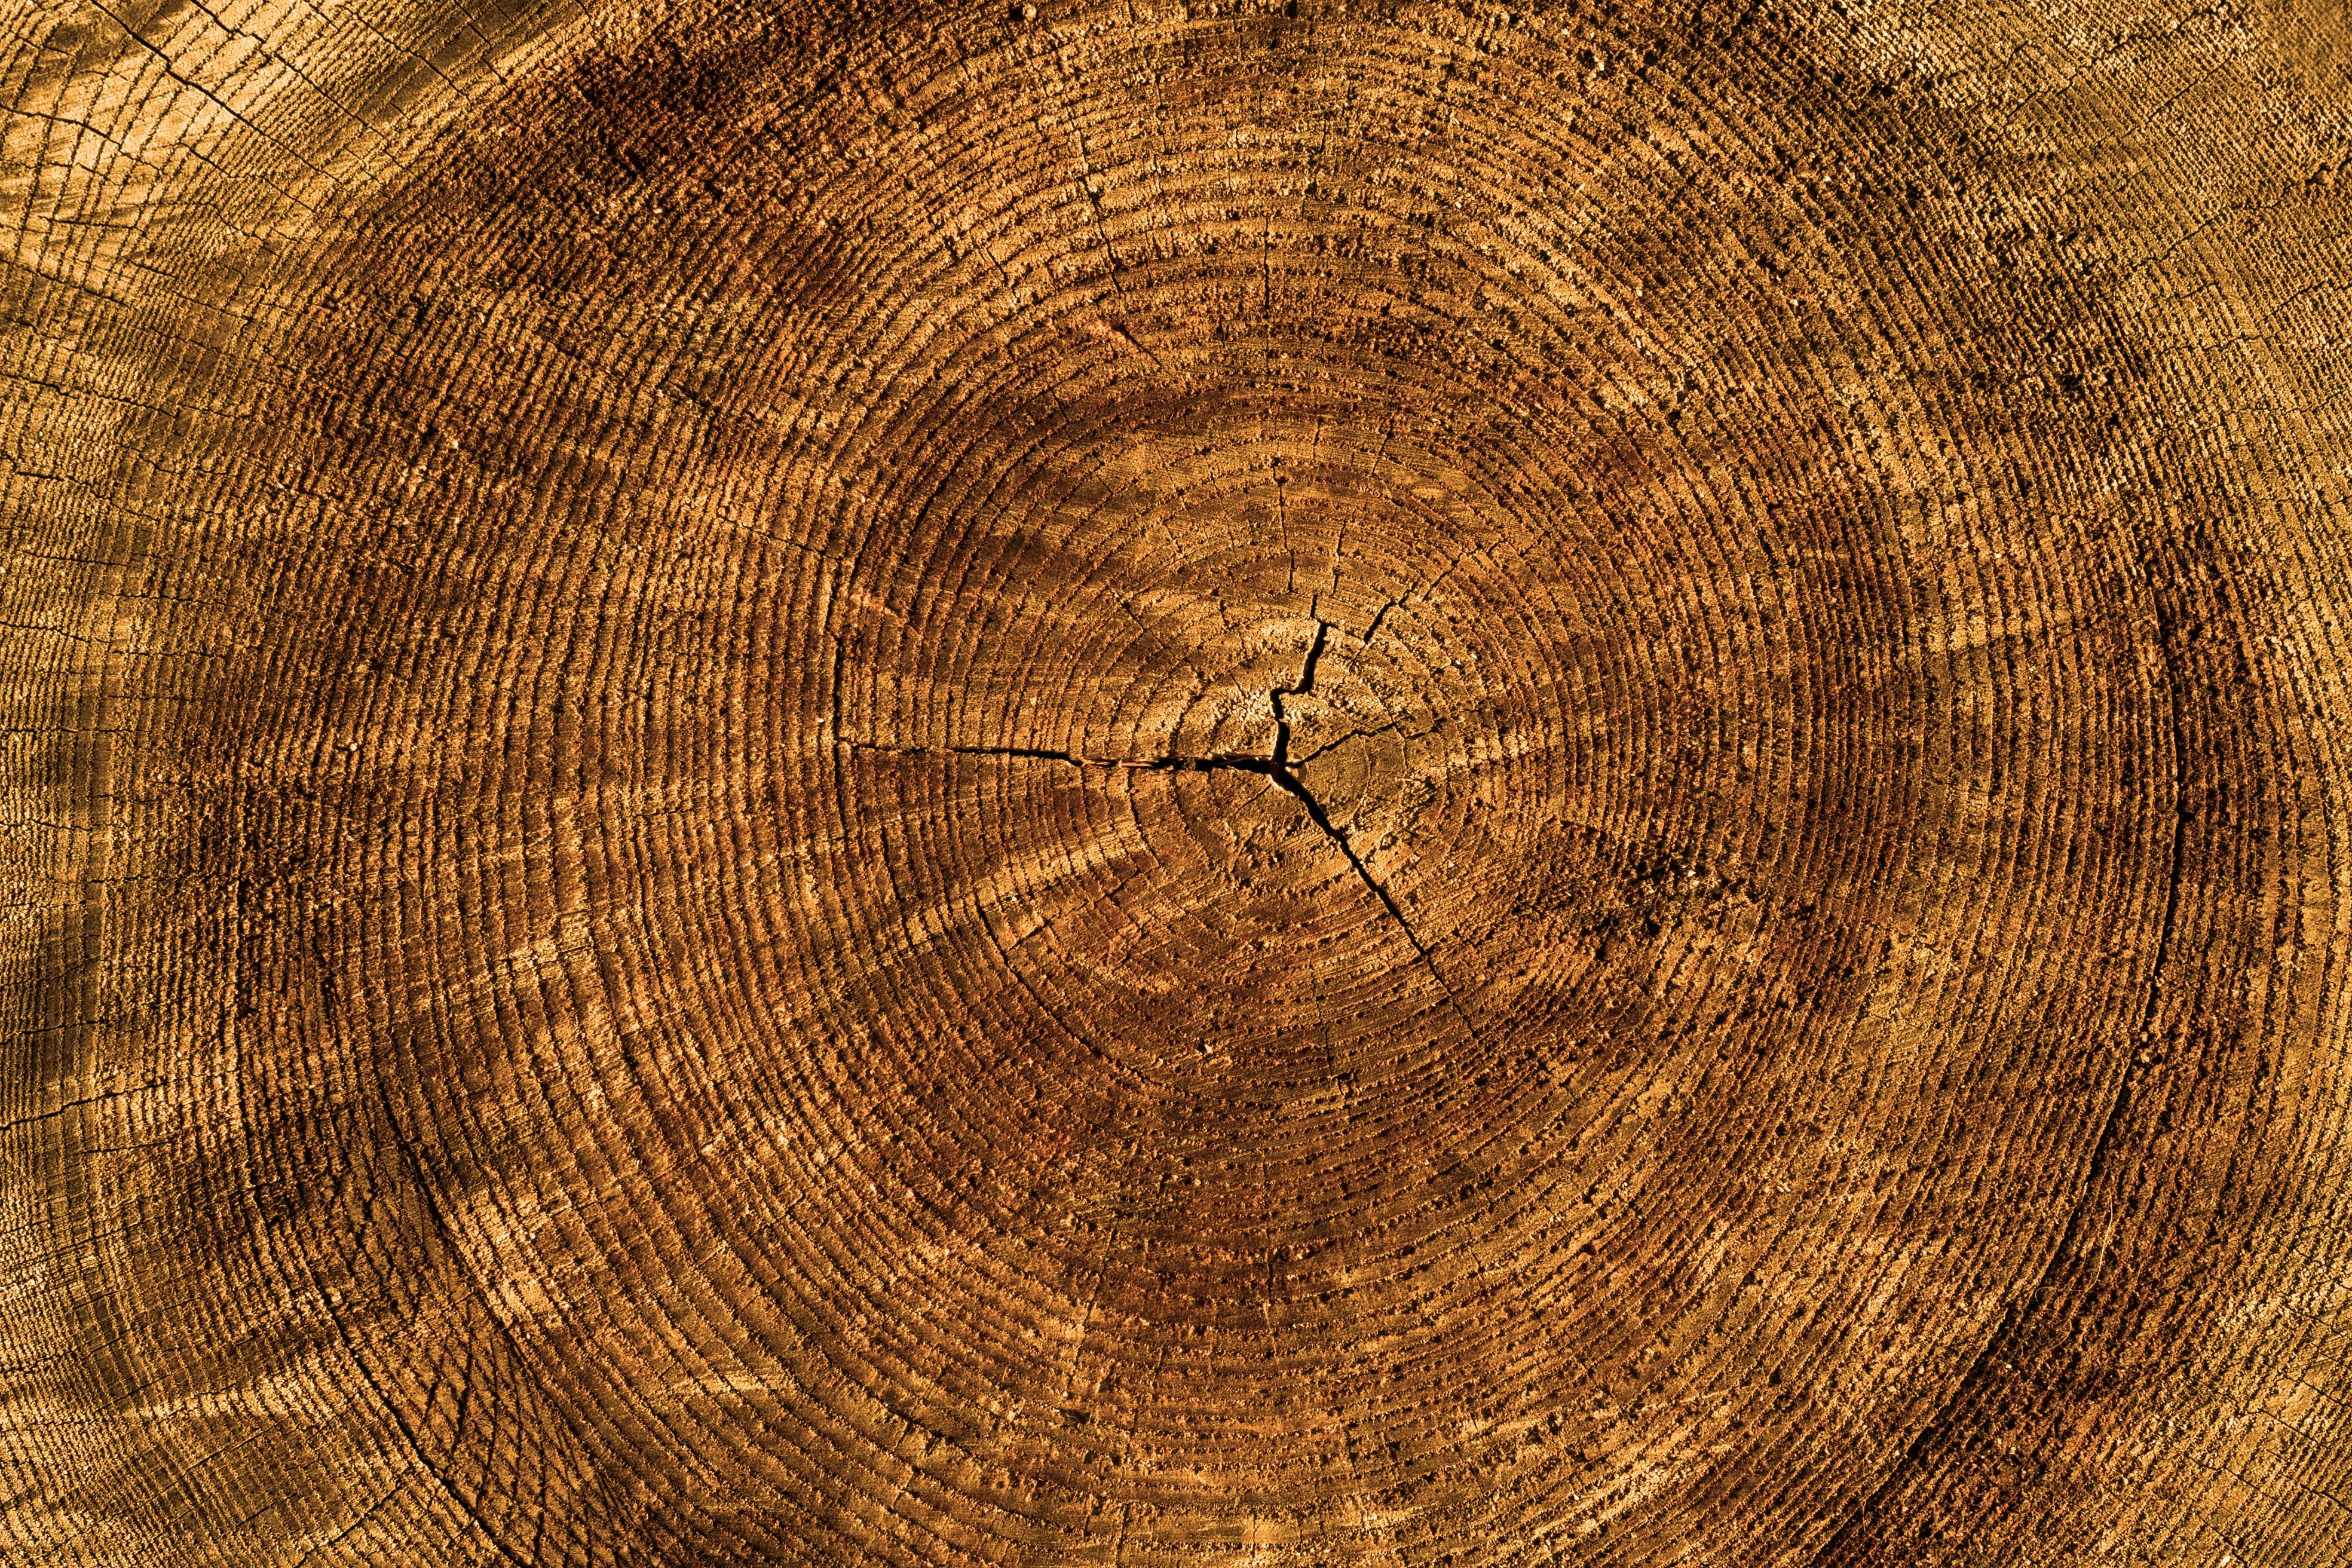 Wood Texture Photos, Download The BEST Free Wood Texture Stock